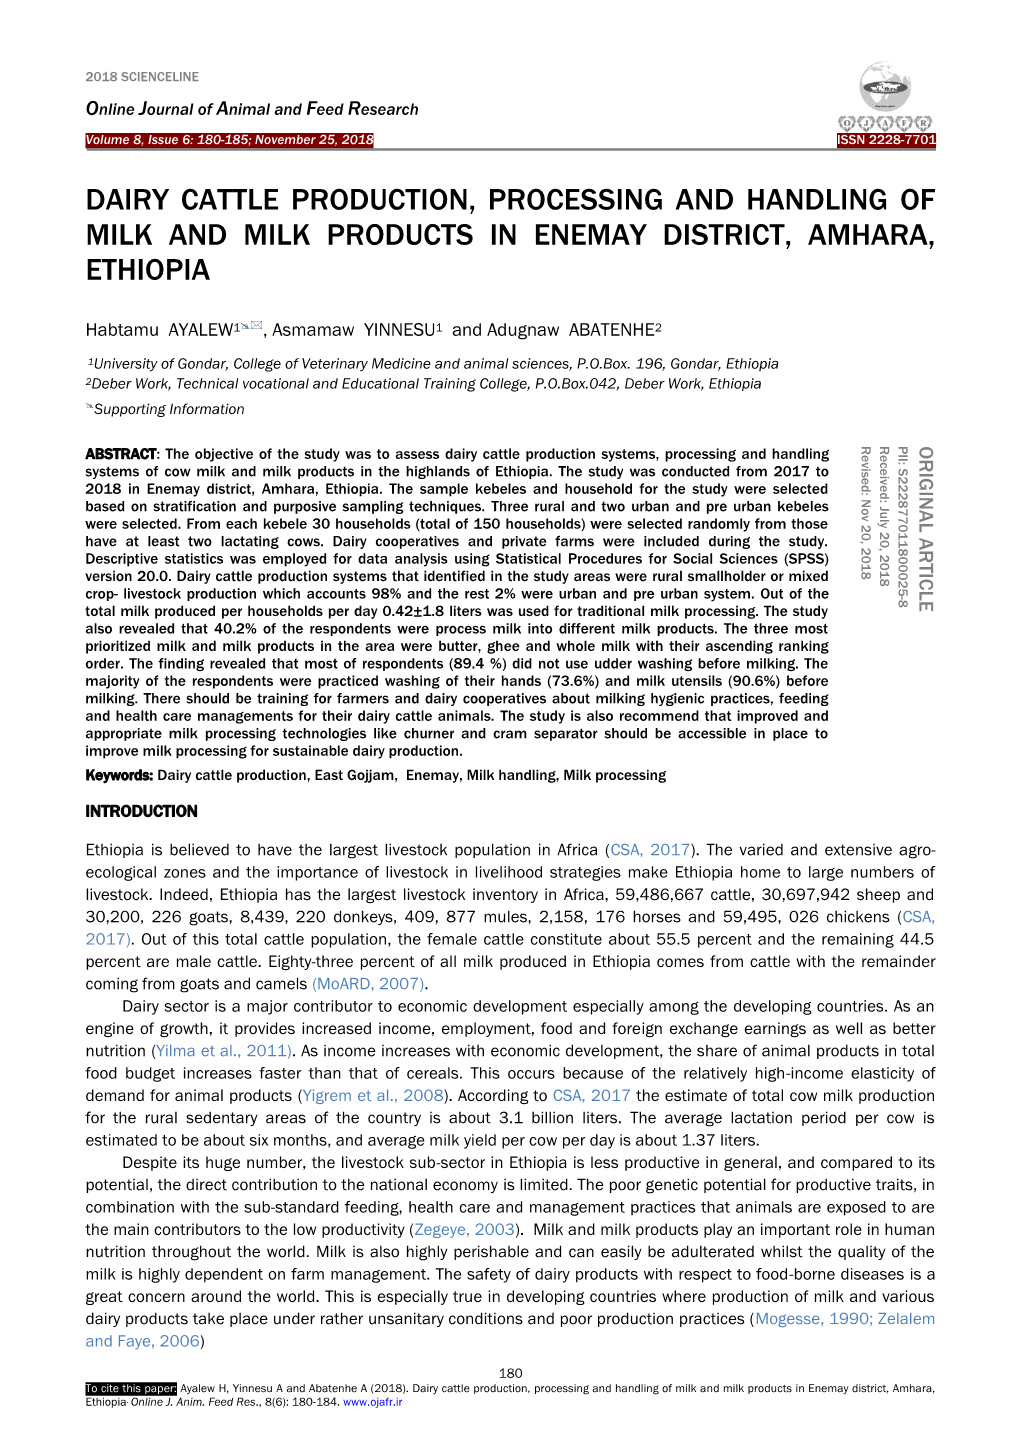 Dairy Cattle Production, Processing and Handling of Milk and Milk Products in Enemay District, Amhara, Ethiopia. Online J. Anim. Feed Res., 8(6): 180-184